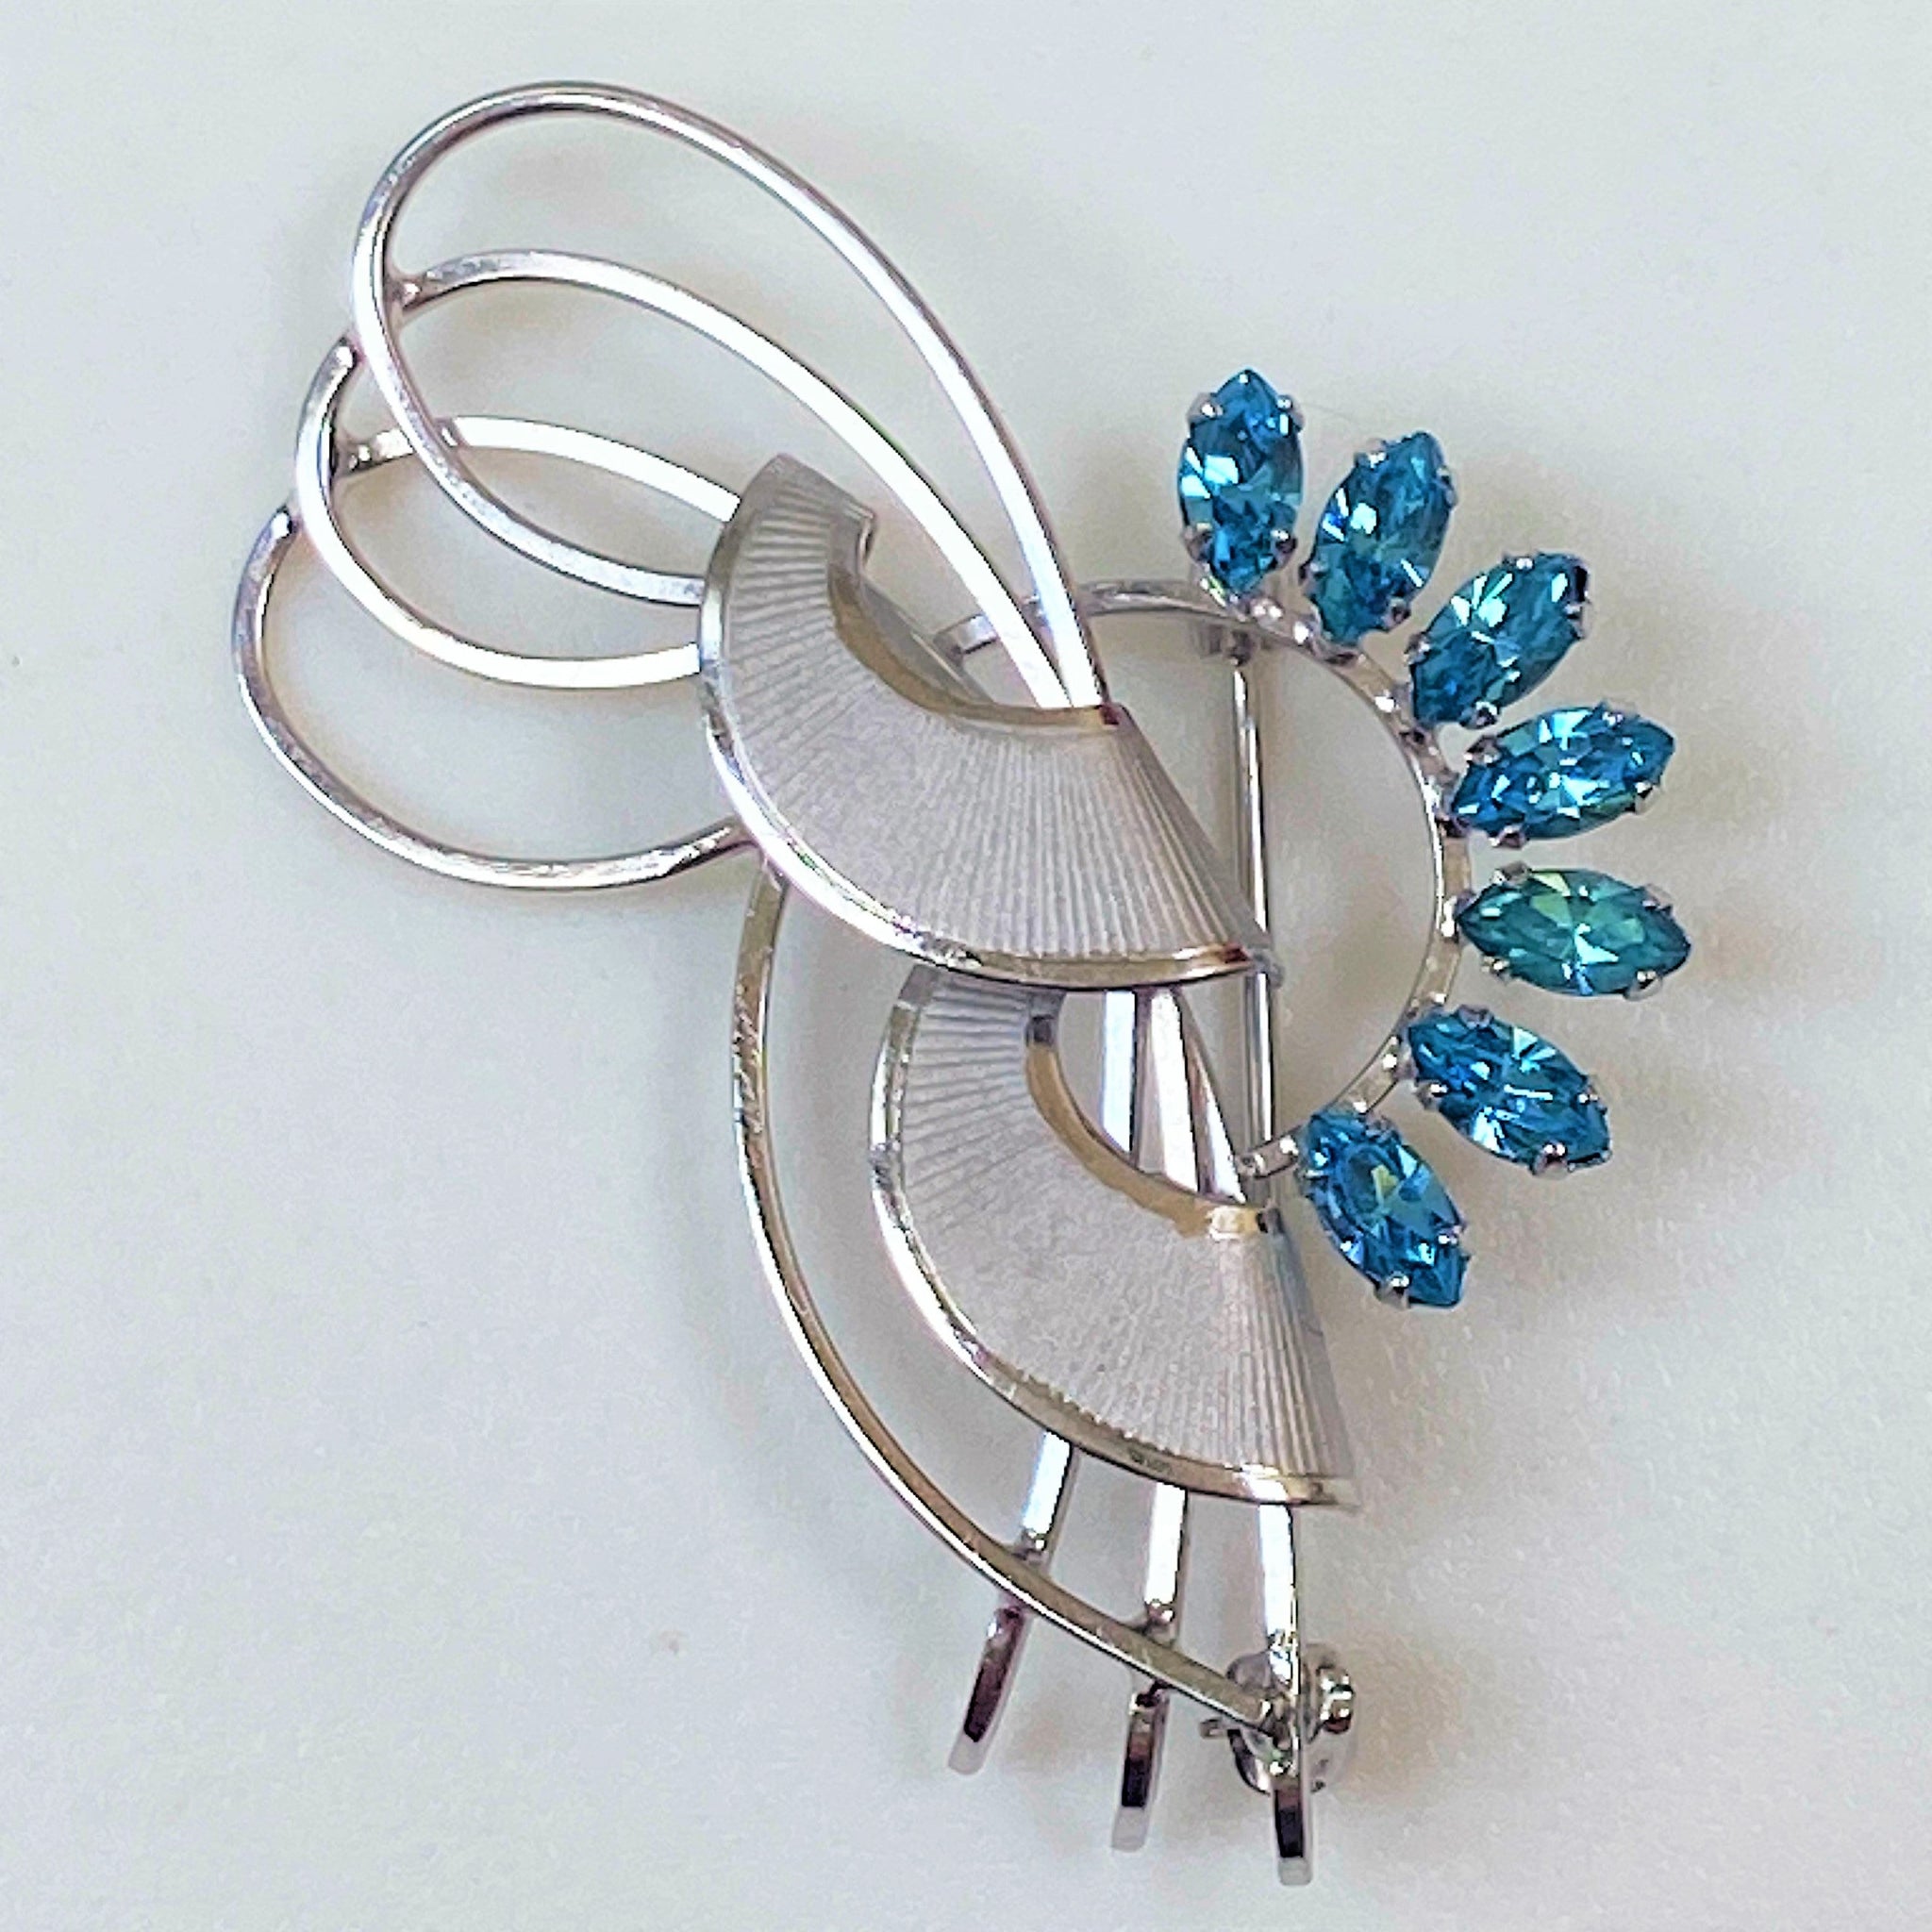 Mid-20th Century Silver and Rhinestone Brooch by Curtis, USA